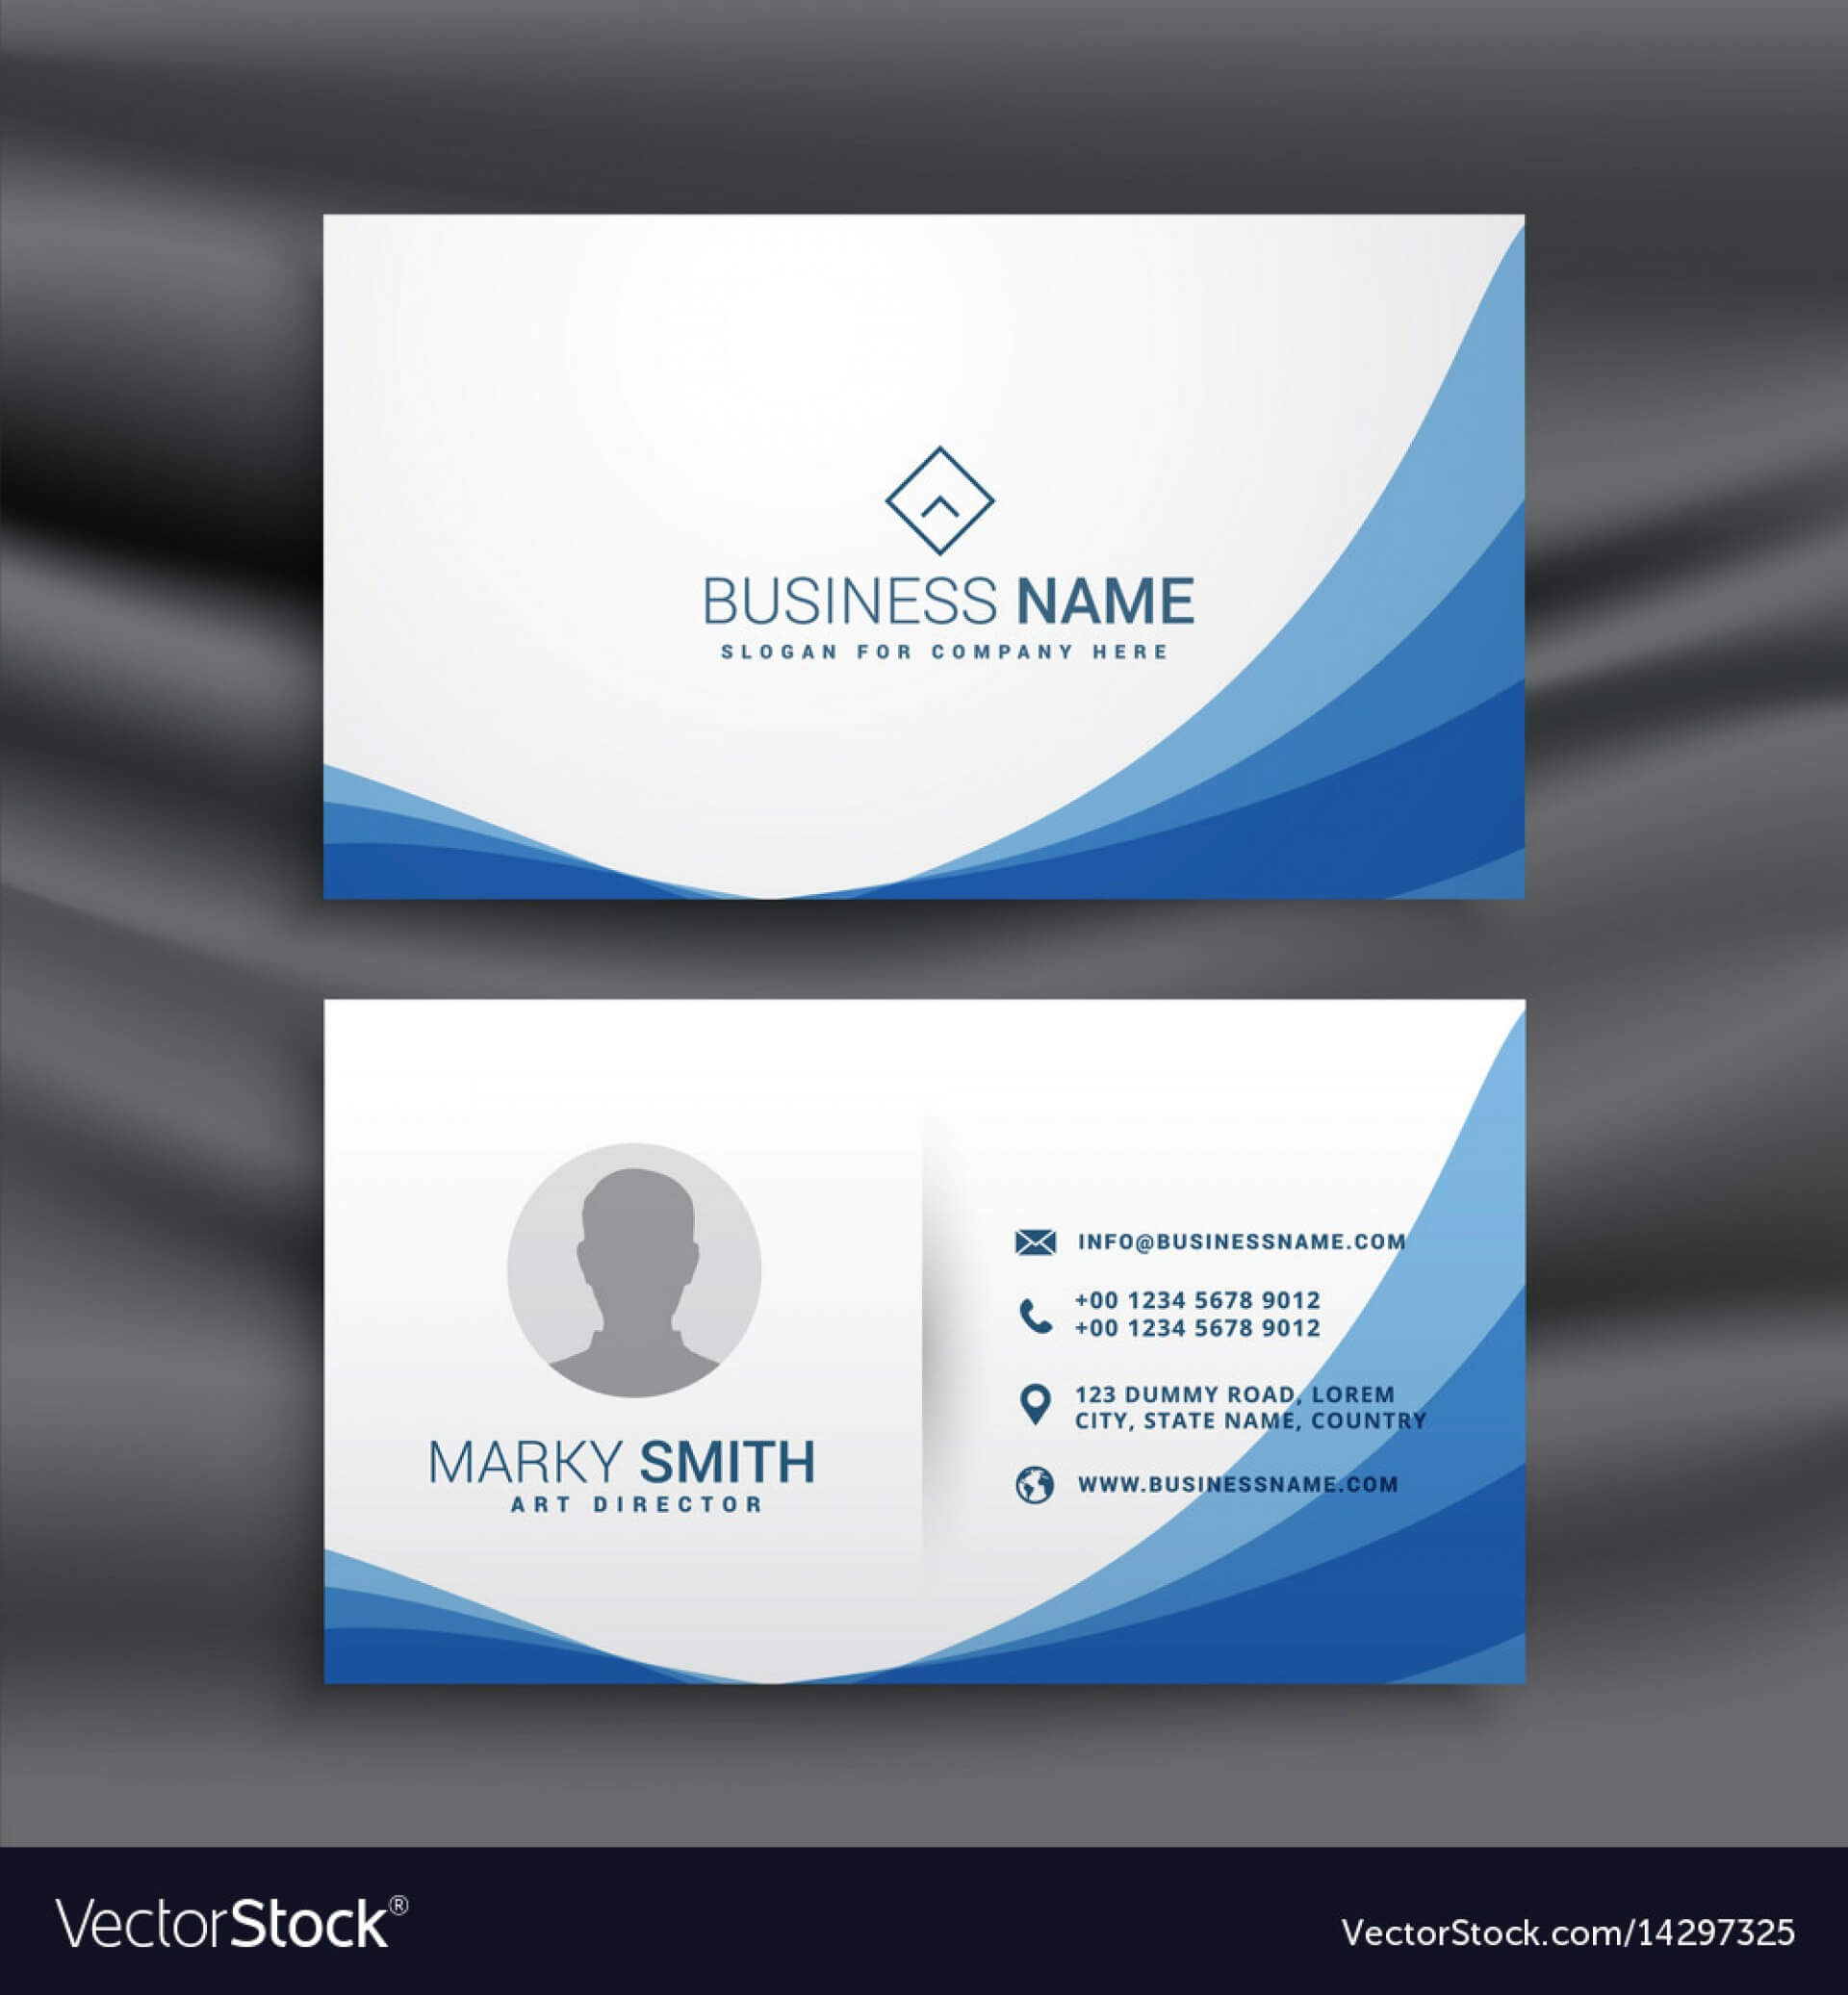 003 Template Ideas Business Card Free Online Simple Graphic Within Generic Business Card Template